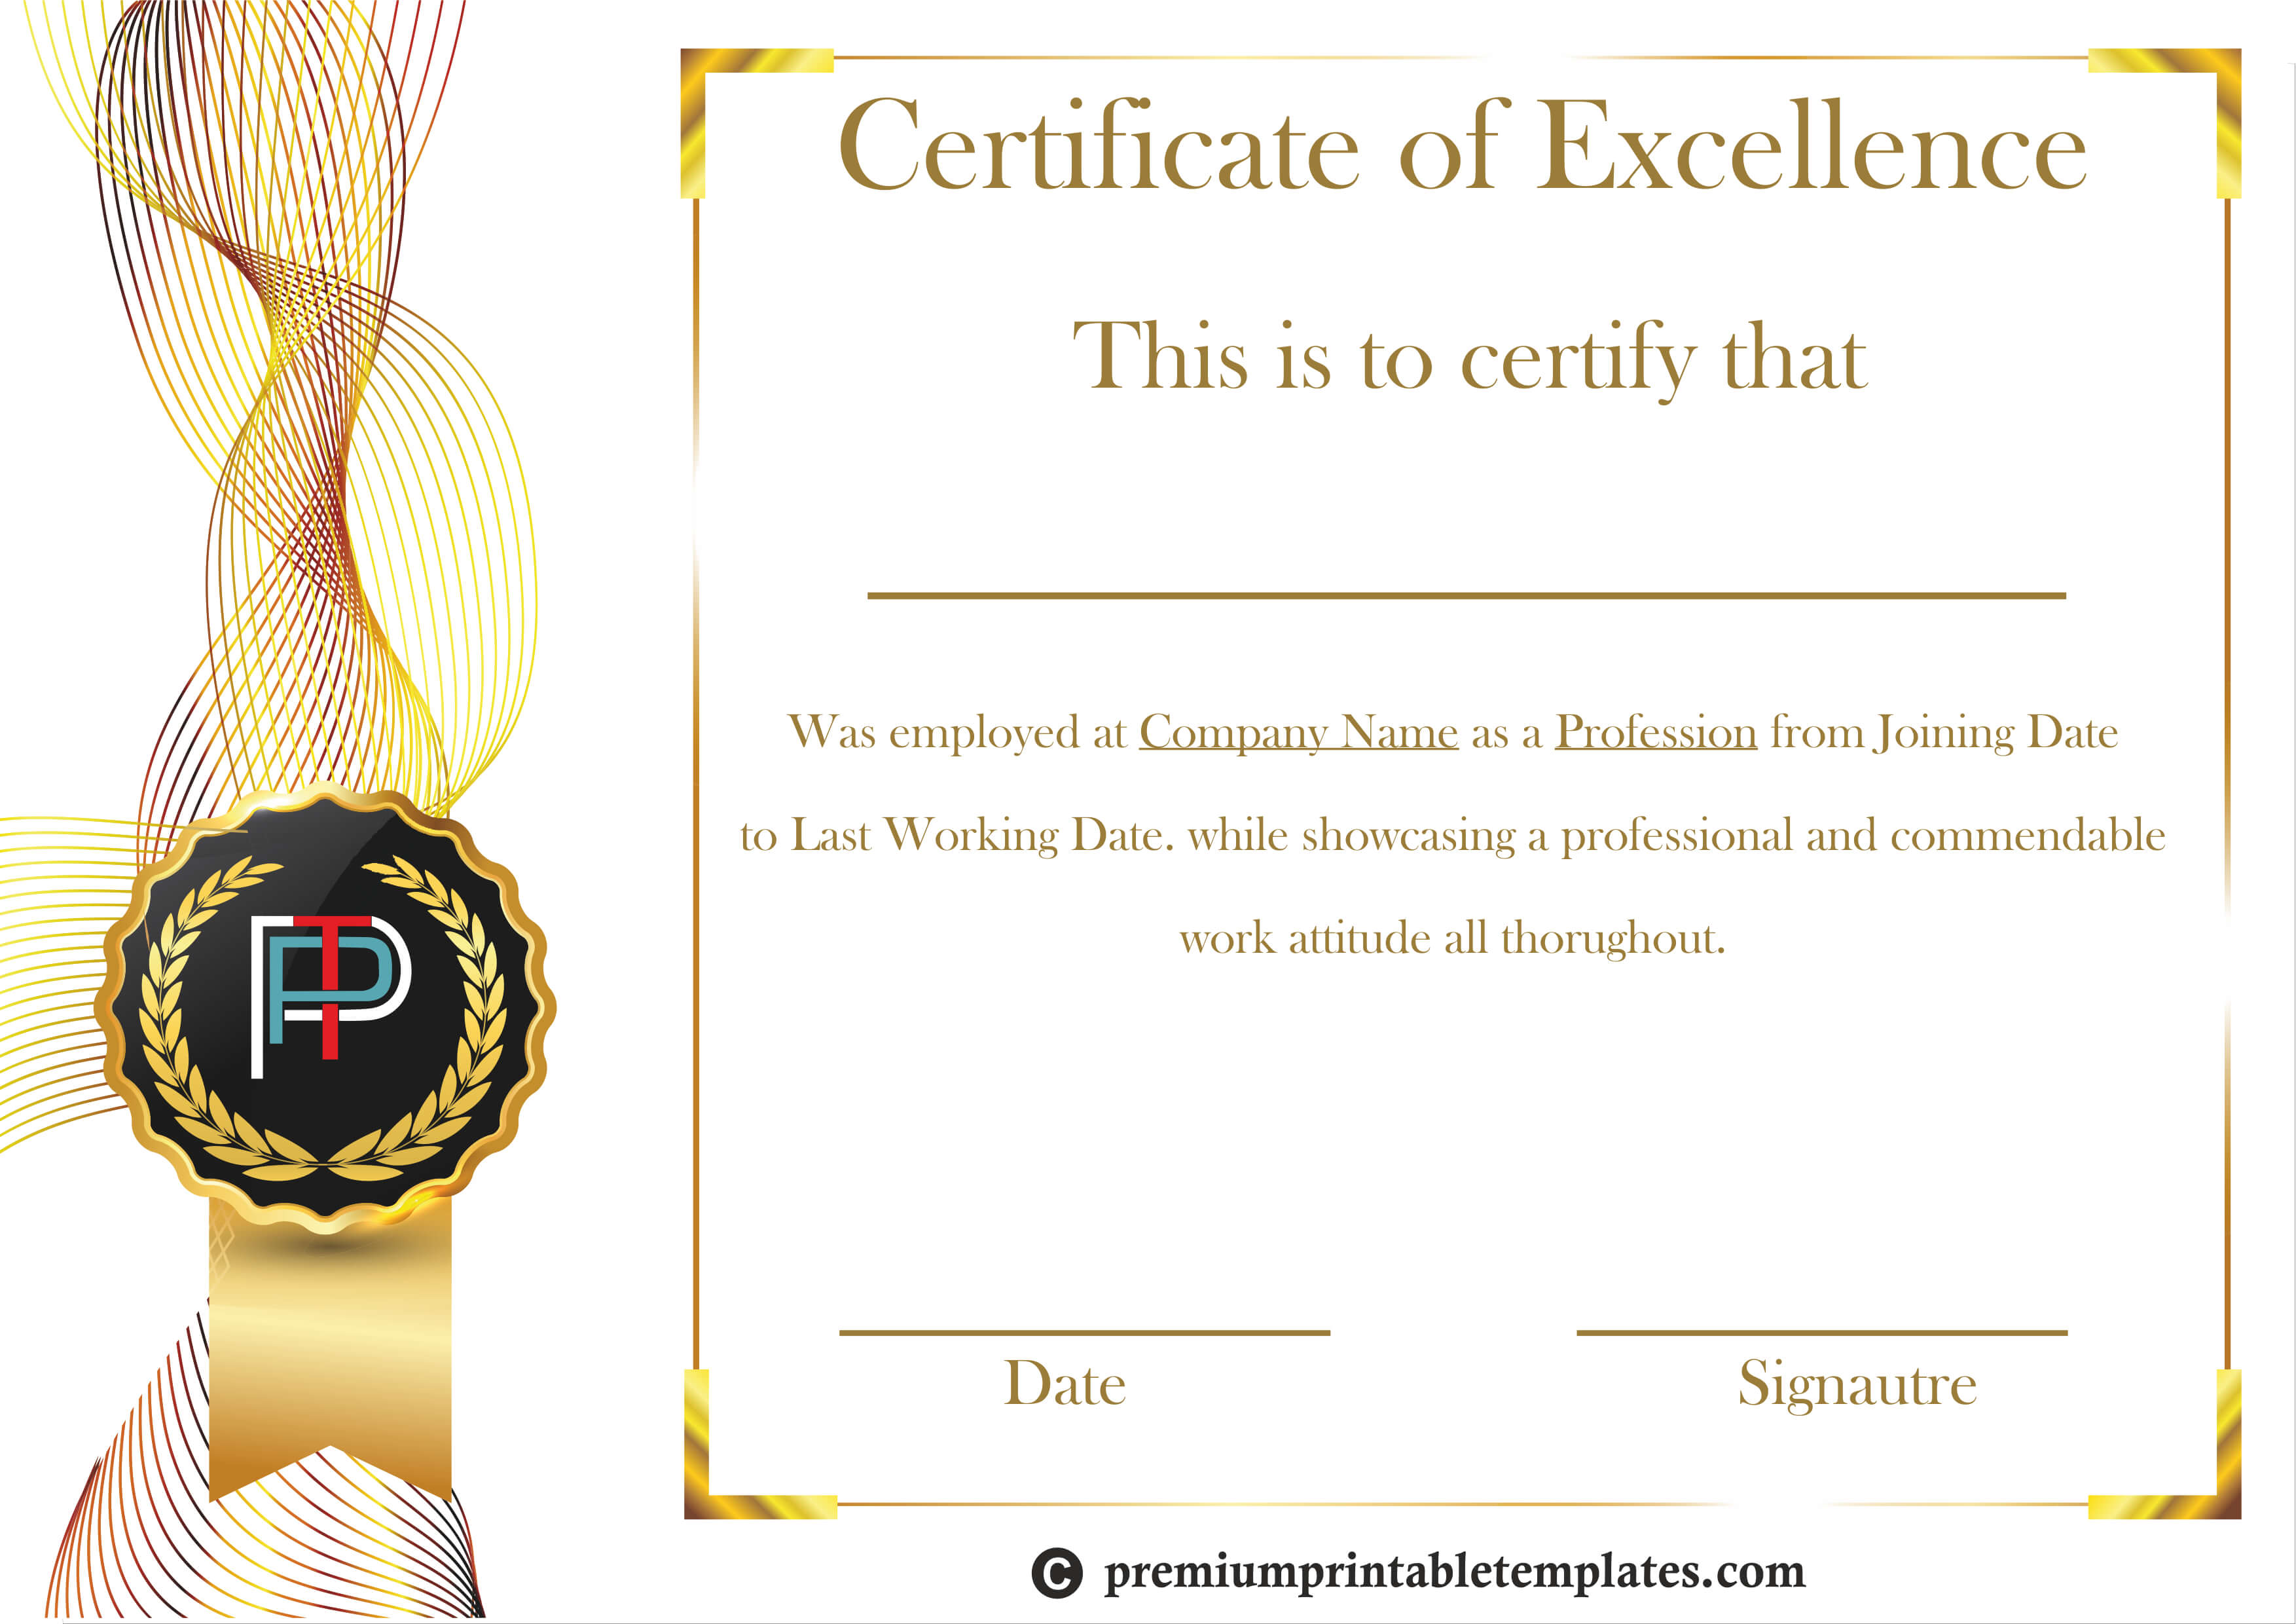 Certificate Of Excellence Template | Certificates In Best Performance Certificate Template